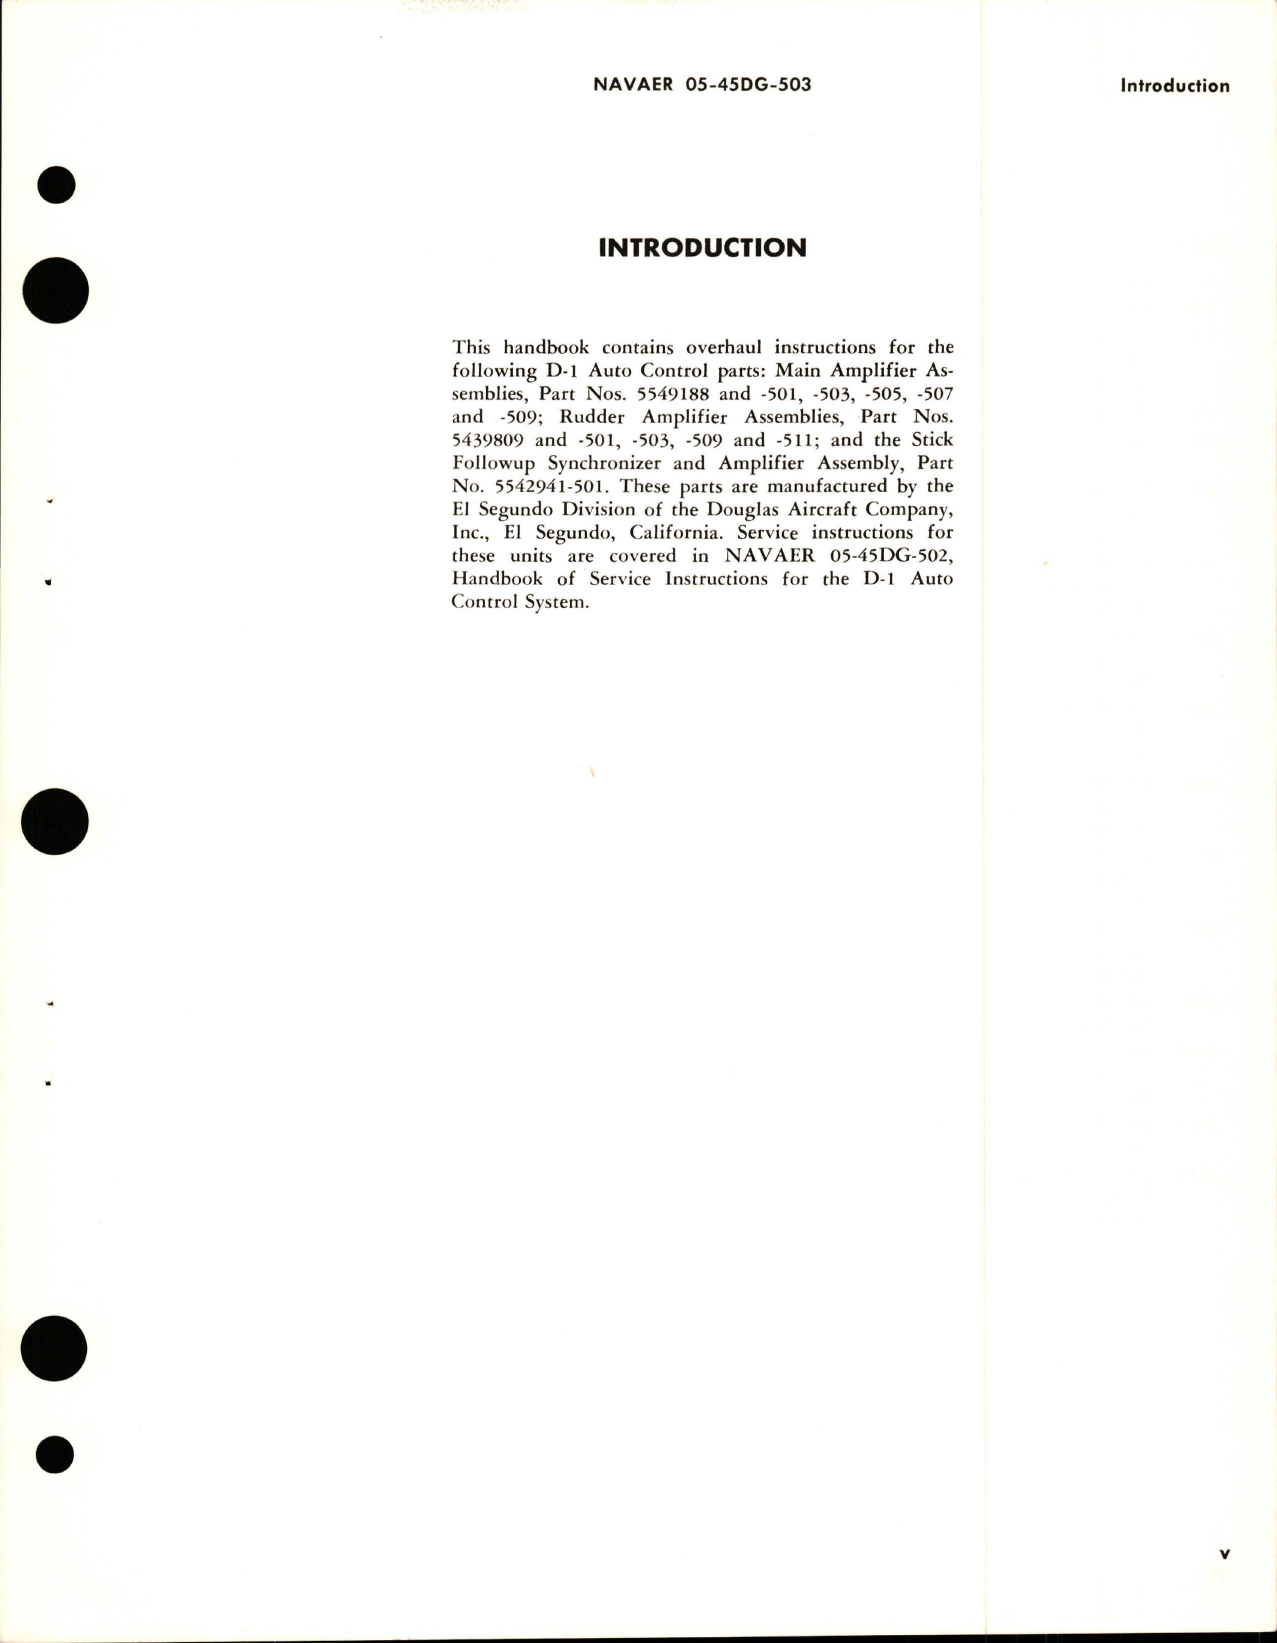 Sample page 7 from AirCorps Library document: Overhaul Instructions for D-1 Autocontrol Main Amplifier Assembly, Rudder Amplifier Assembly, and Stick Follow up Synchronizer